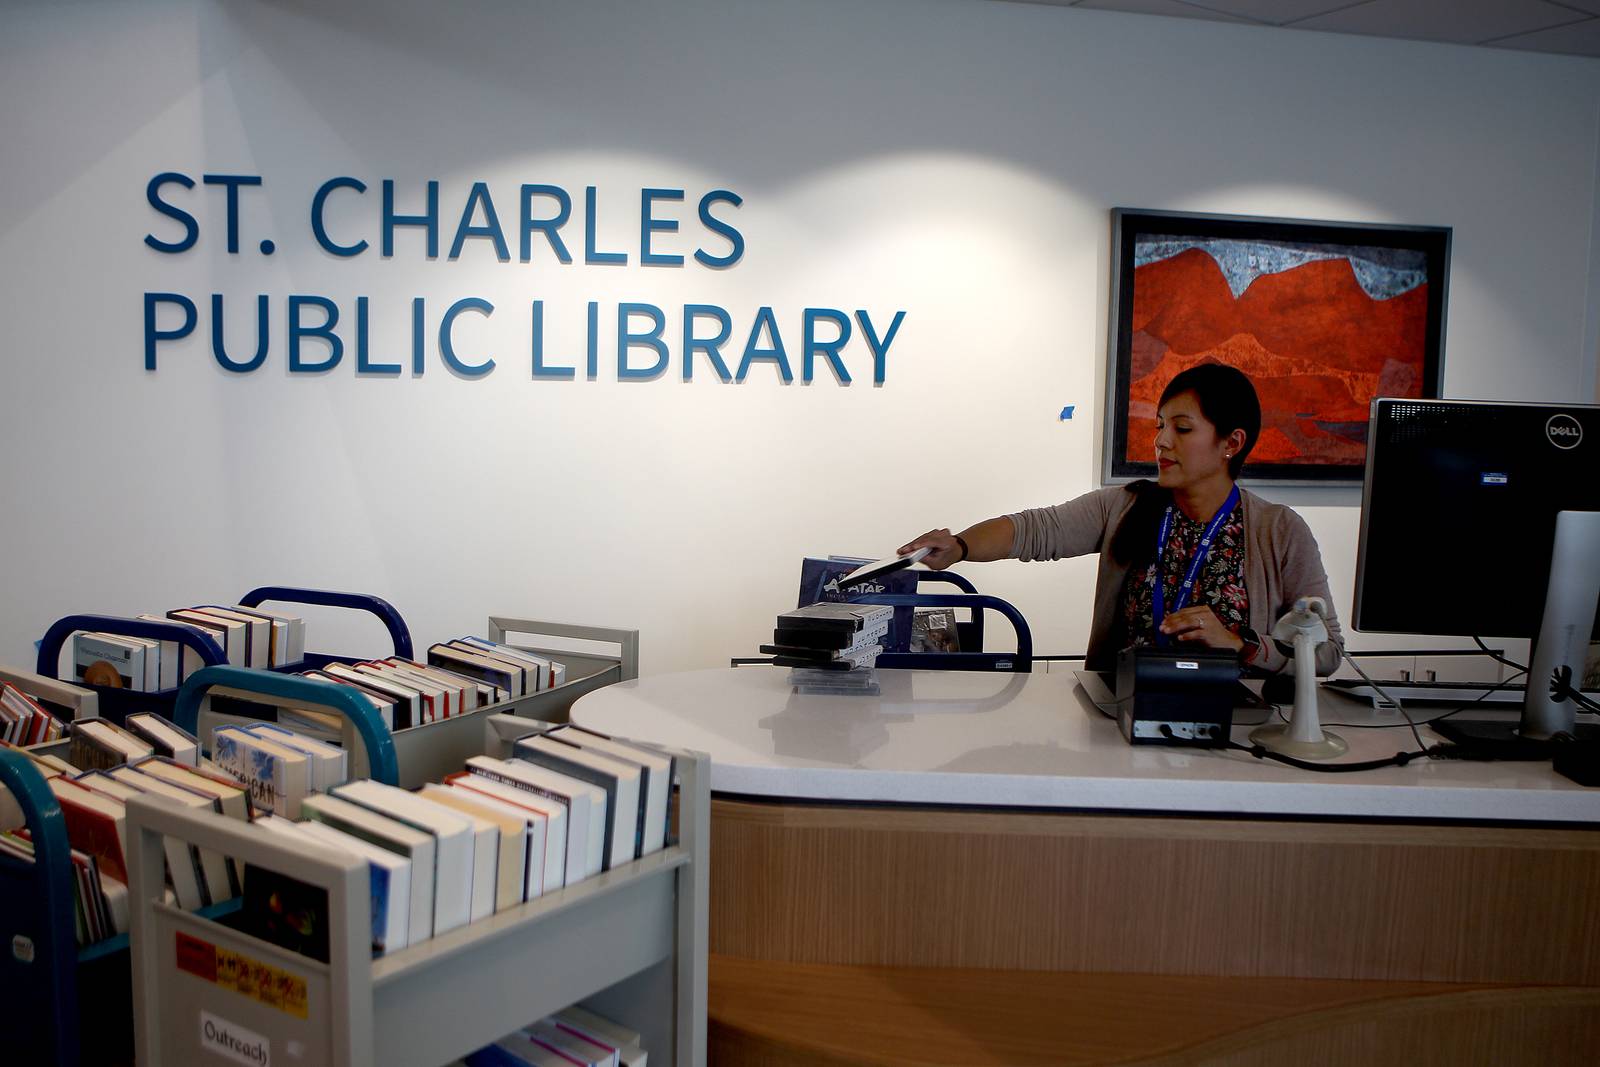 Newly expanded, renovated St. Charles Public Library getting ready to